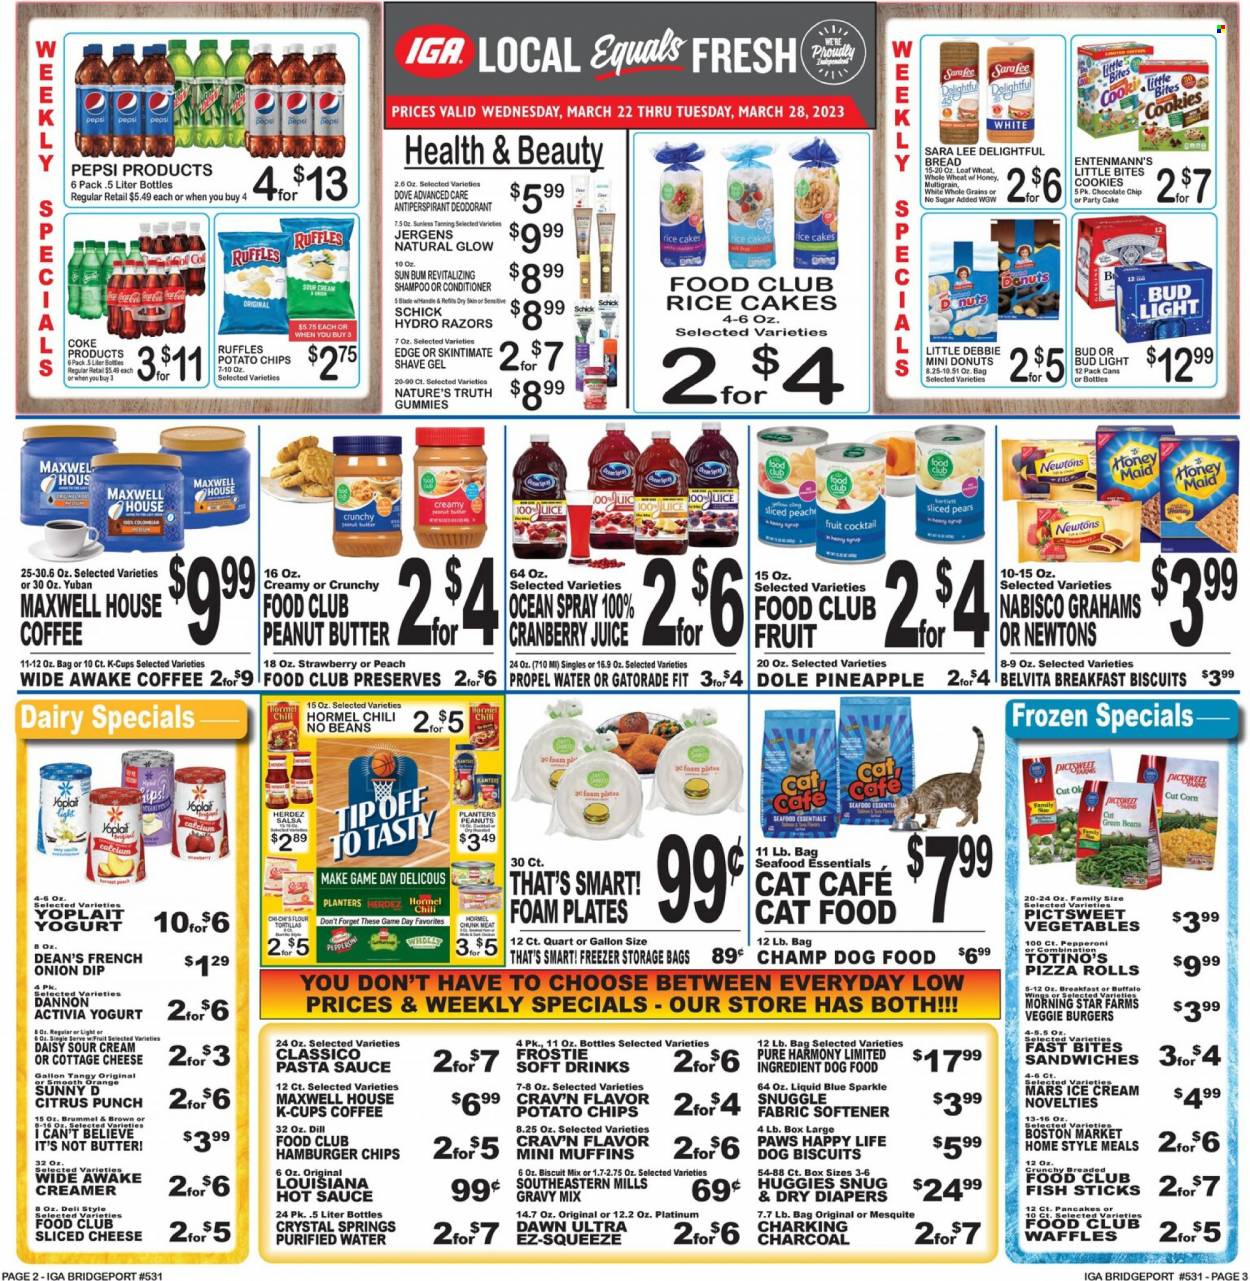 thumbnail - IGA Flyer - 03/22/2023 - 03/28/2023 - Sales products - bread, tortillas, pizza rolls, Sara Lee, donut, muffin, waffles, Entenmann's, green beans, Dole, pineapple, pears, oranges, fish, fish fingers, fish sticks, pizza, pasta sauce, sandwich, soup, sauce, veggie burger, Hormel, cottage cheese, sliced cheese, yoghurt, Activia, Yoplait, Dannon, I Can't Believe It's Not Butter, sour cream, creamer, dip, ice cream, cookies, Dove, chocolate chips, Mars, biscuit, Little Bites, potato chips, Ruffles, belVita, Honey Maid, dill, gravy mix, hot sauce, salsa, Classico, peanut butter, Planters, cranberry juice, Pepsi, juice, soft drink, Gatorade, fruit punch, purified water, water, Maxwell House, coffee, coffee capsules, K-Cups, beer, Bud Light, Huggies, fabric softener, shampoo, conditioner, Jergens, anti-perspirant, deodorant, shave gel, Schick, storage bag, plate, foam plates, animal food, cat food, dog food, Nature's Truth. Page 2.